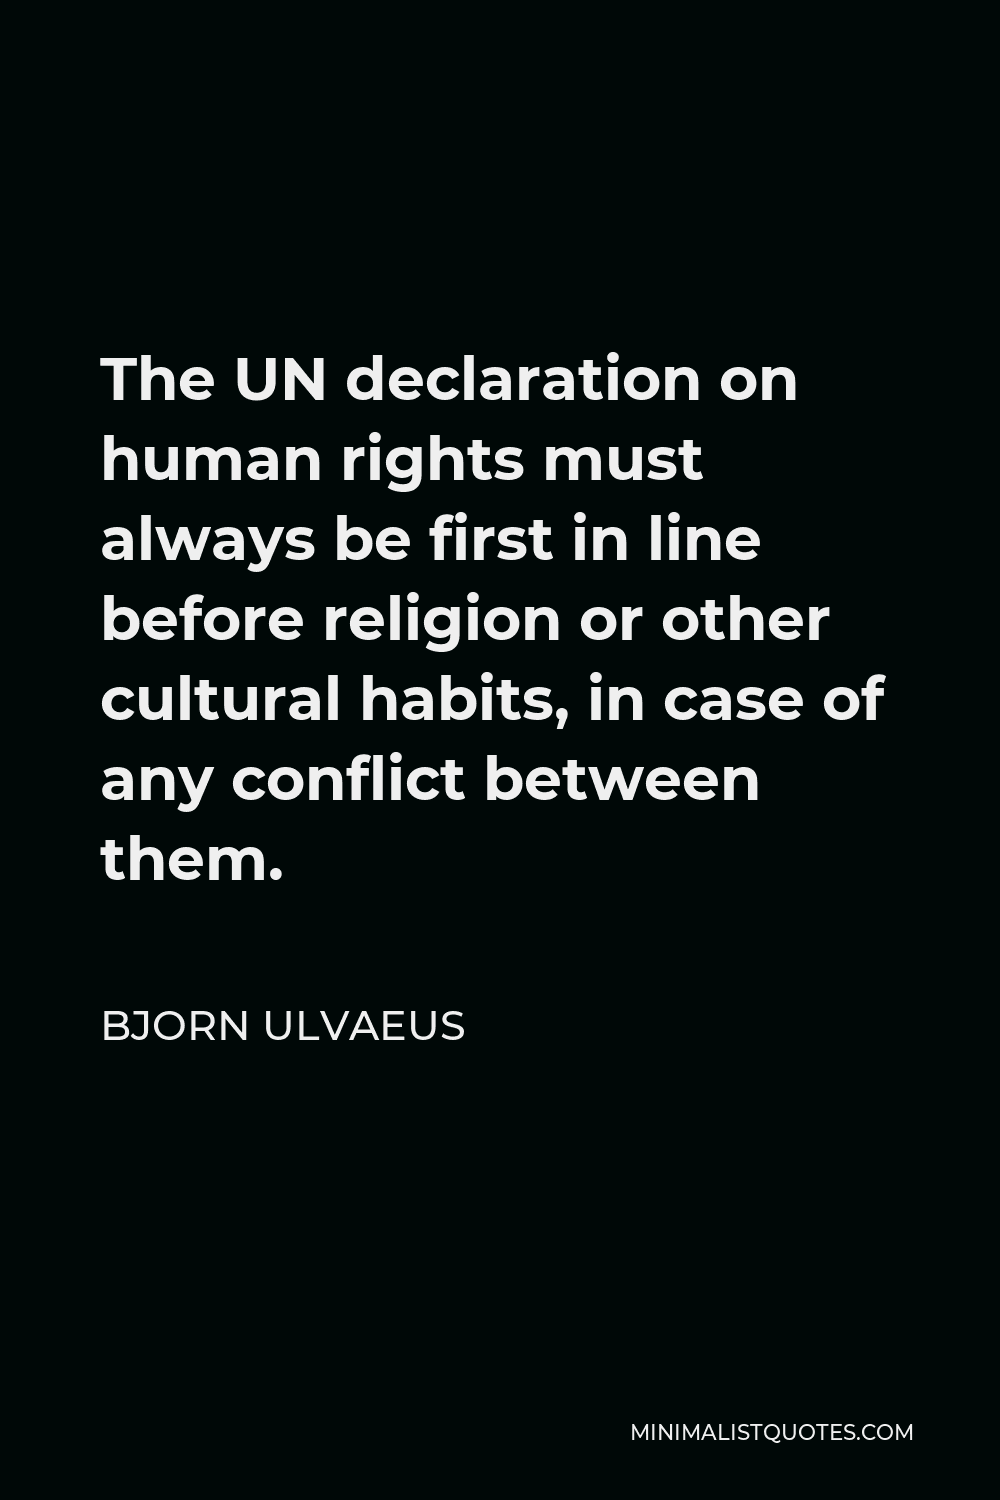 Bjorn Ulvaeus Quote - The UN declaration on human rights must always be first in line before religion or other cultural habits, in case of any conflict between them.